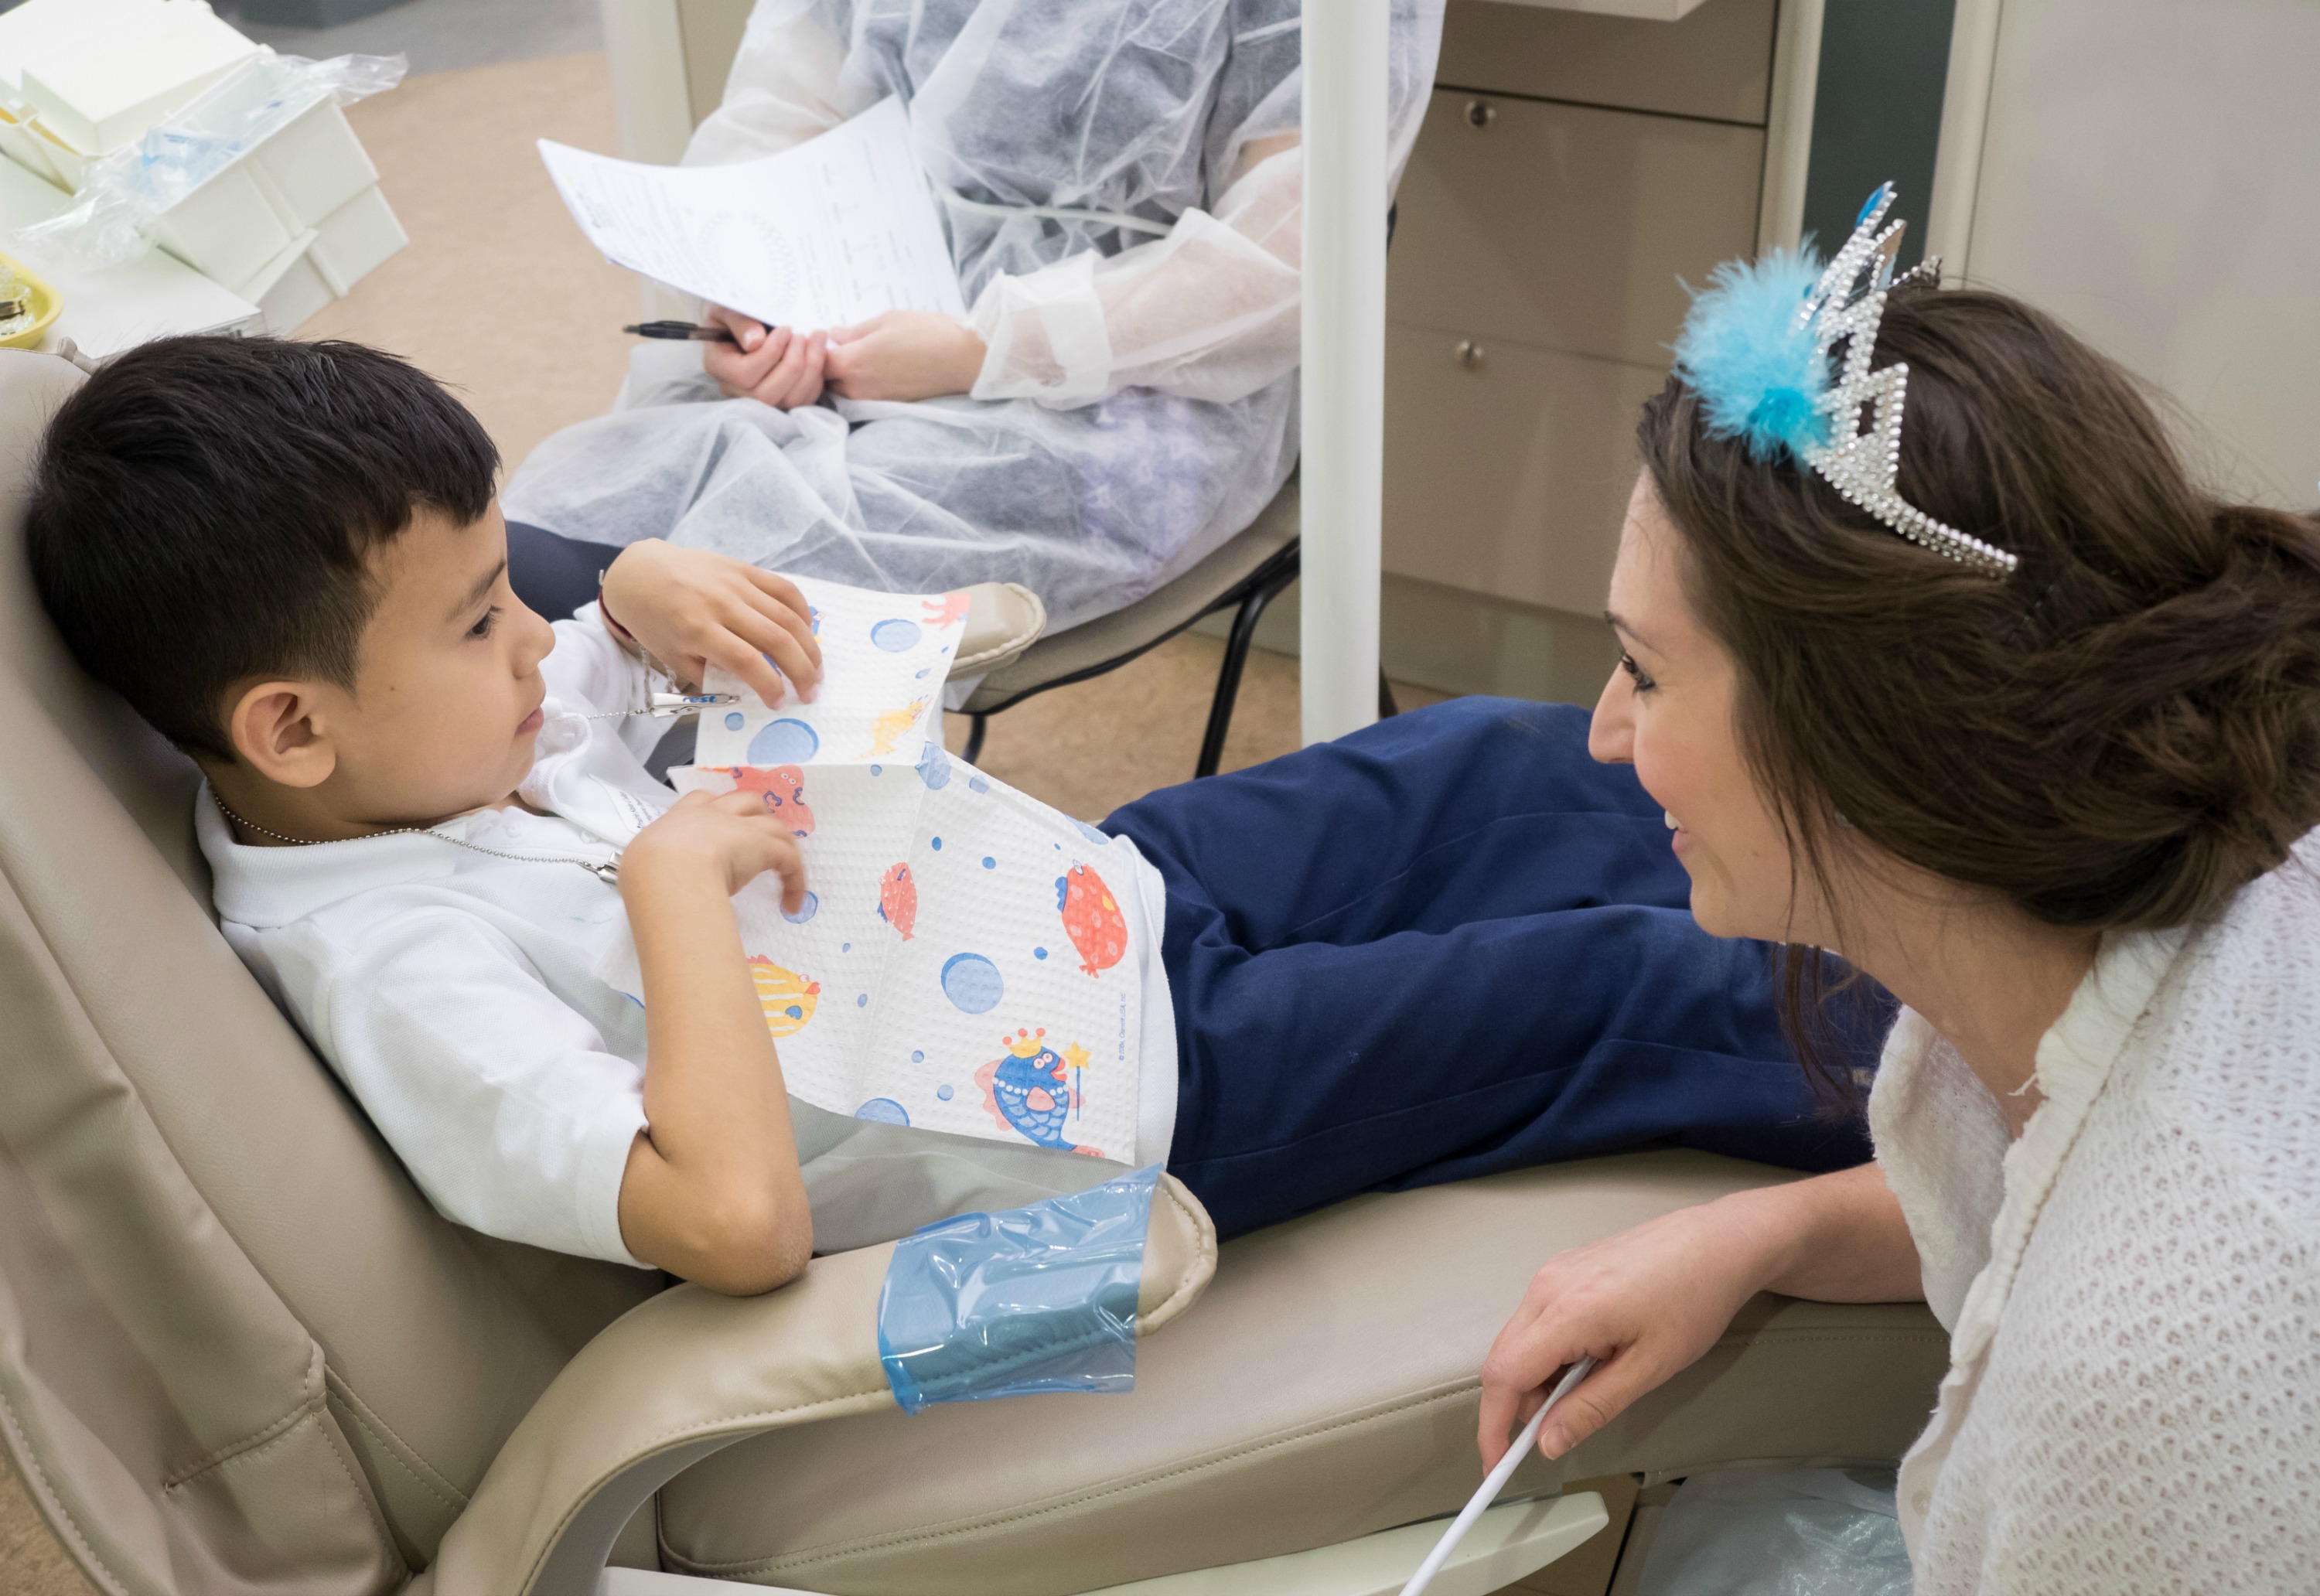 The “Tooth Fairy” recently visited with several area elementary students during the Prairie State College 2015 Healthy Smiles Day. The annual event provides children from a local elementary school with free dental care.